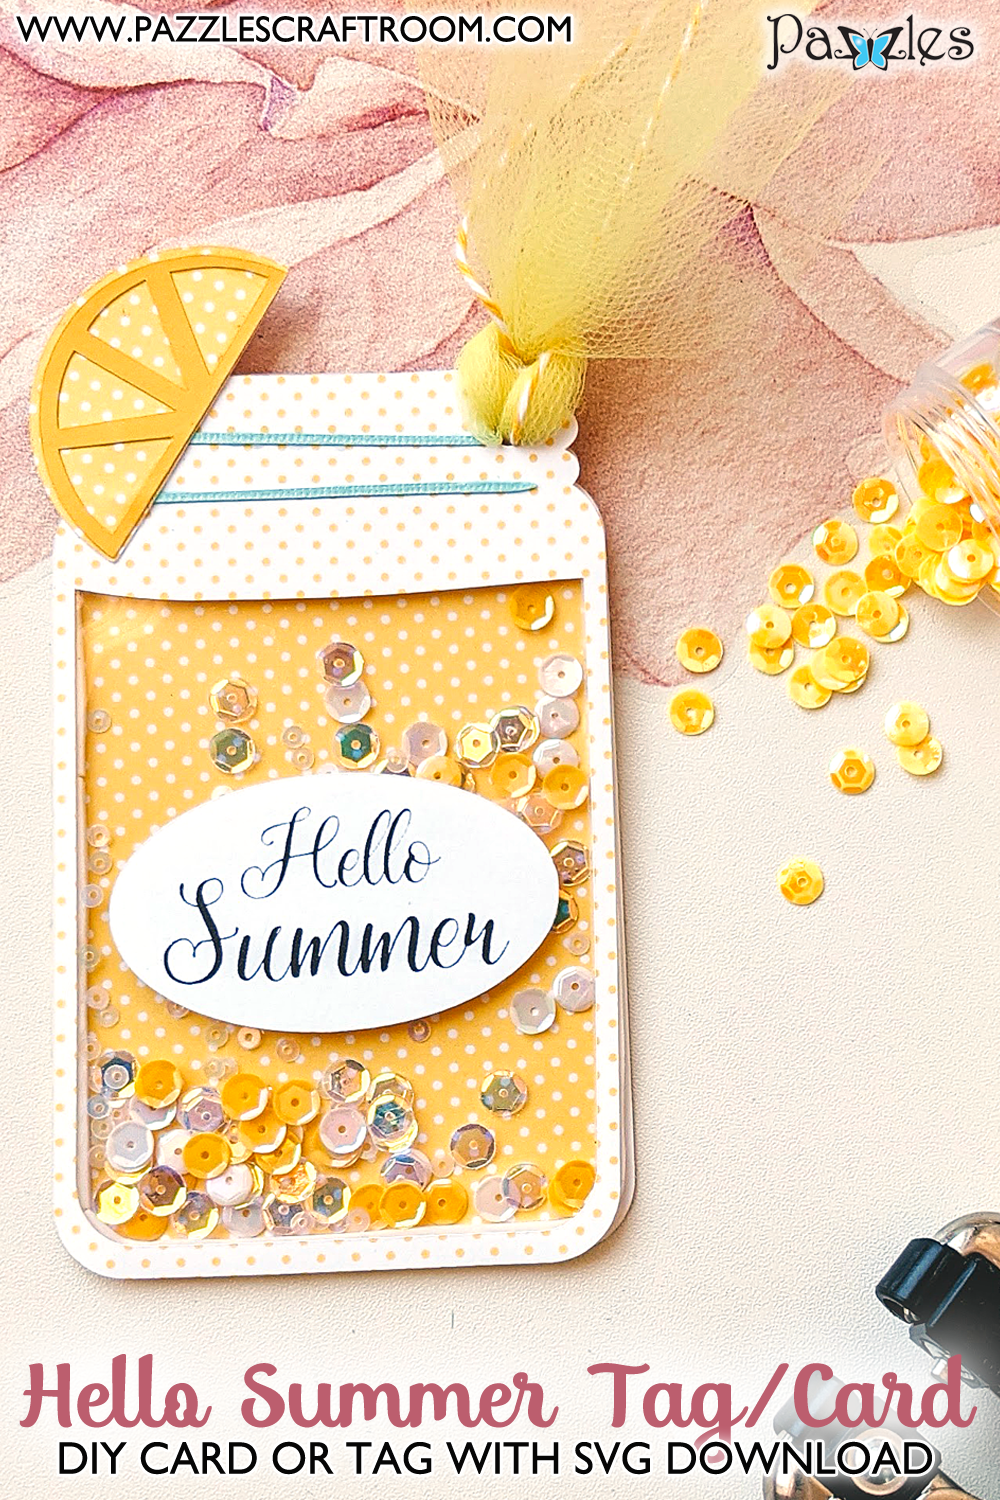 Pazzles DIY Lemonade Shaker Tag or Card with instant SVG download. Instant SVG download compatible with all major electronic cutters including Pazzles Inspiration, Cricut, and Silhouette Cameo. Design by Monica Martinez.